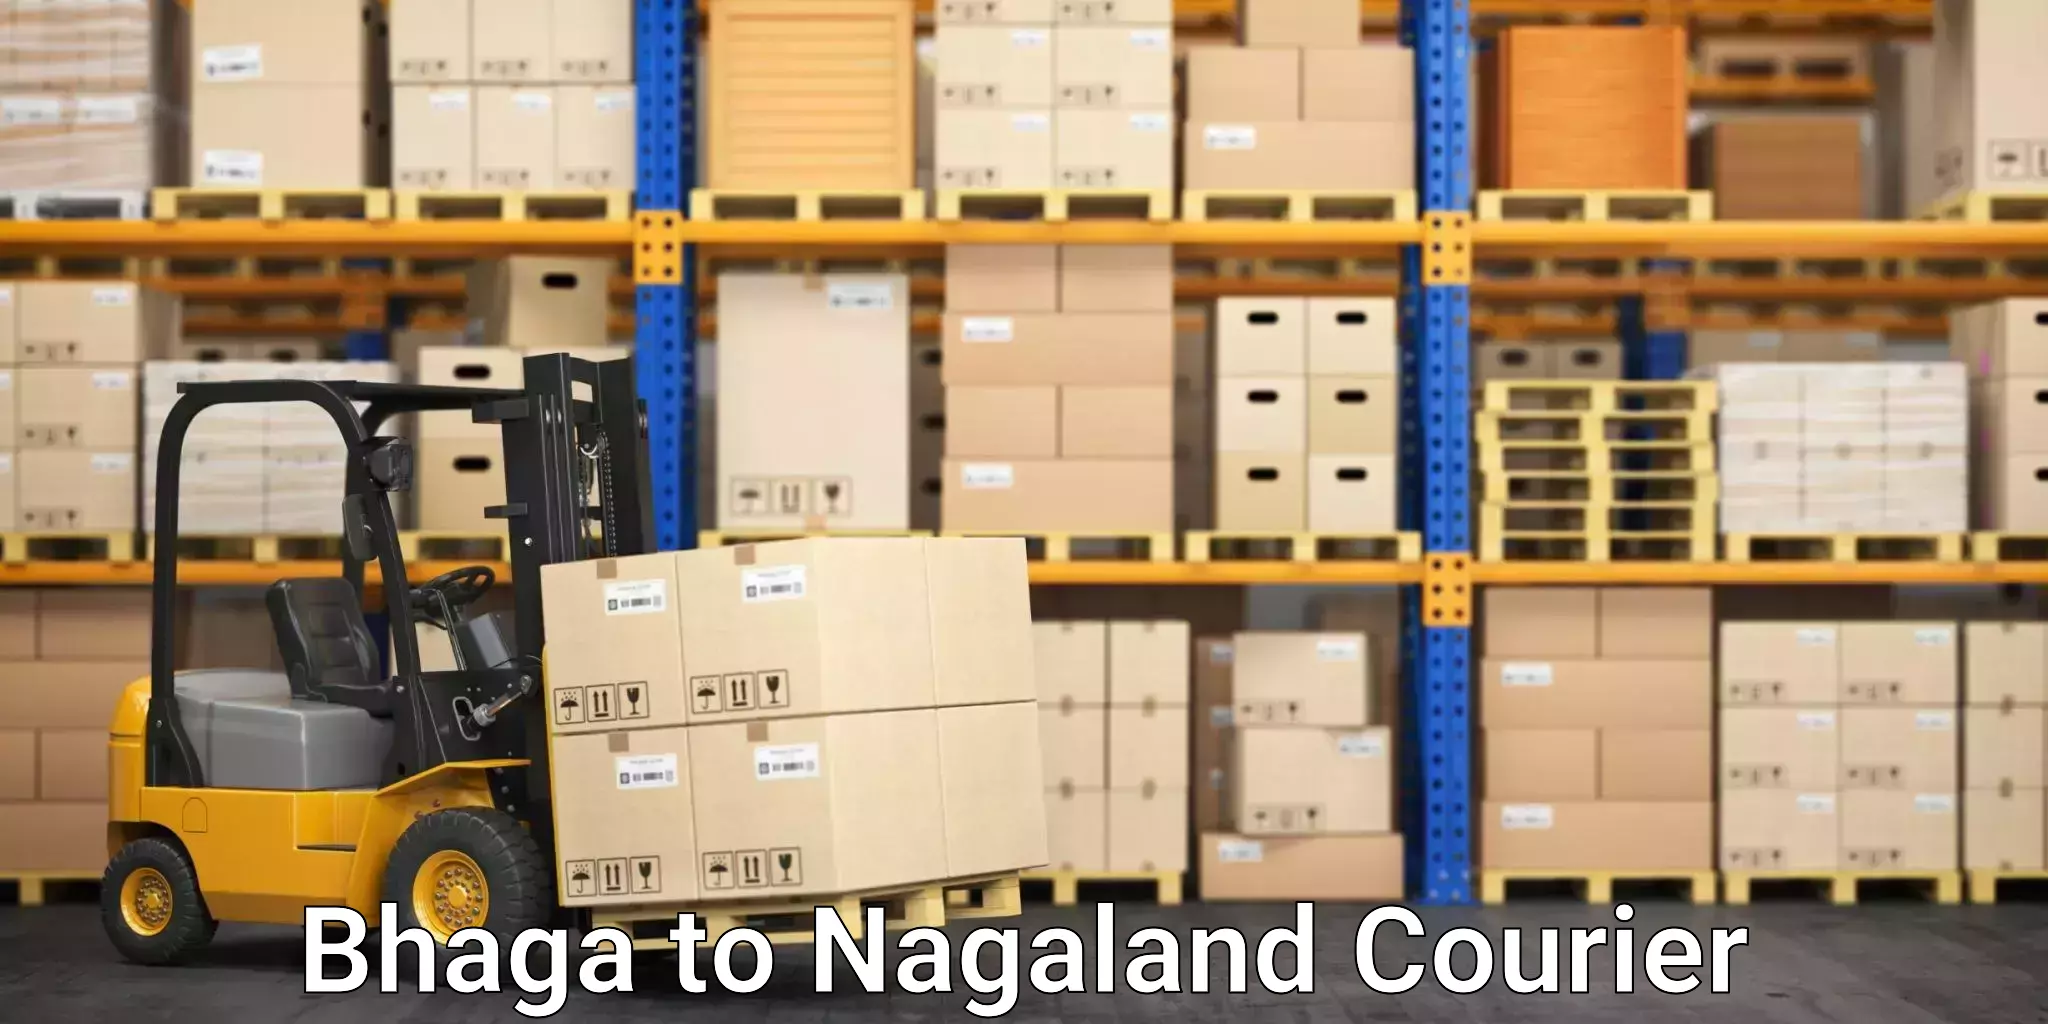 Postal and courier services Bhaga to Nagaland